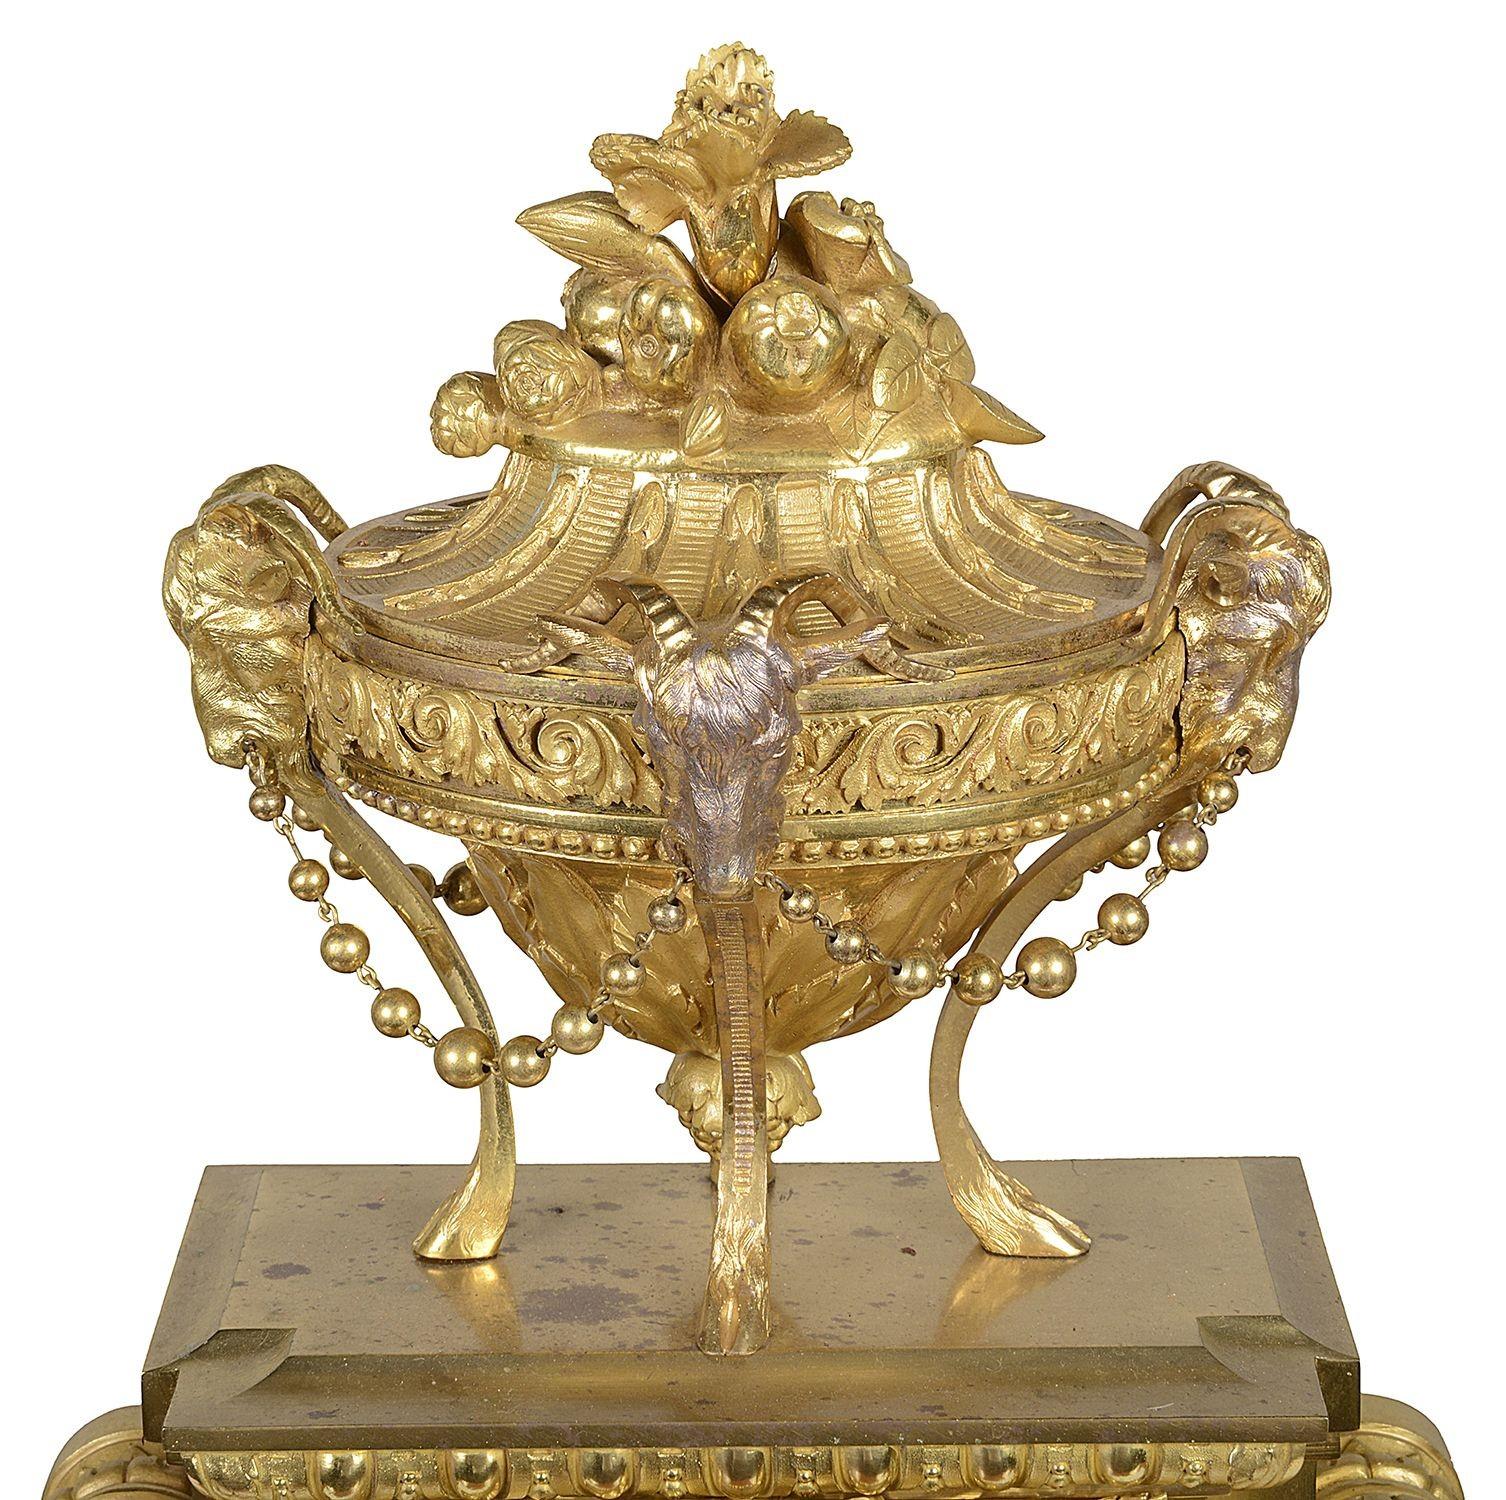 A very good quality mid 19th Century French gilded ormolu Louis XVI style mantel clock with a matched pair of classical five brach candelabra, with putti supporting cornucopia. The clock having a wonderful classical urn with Rams head mounts, the